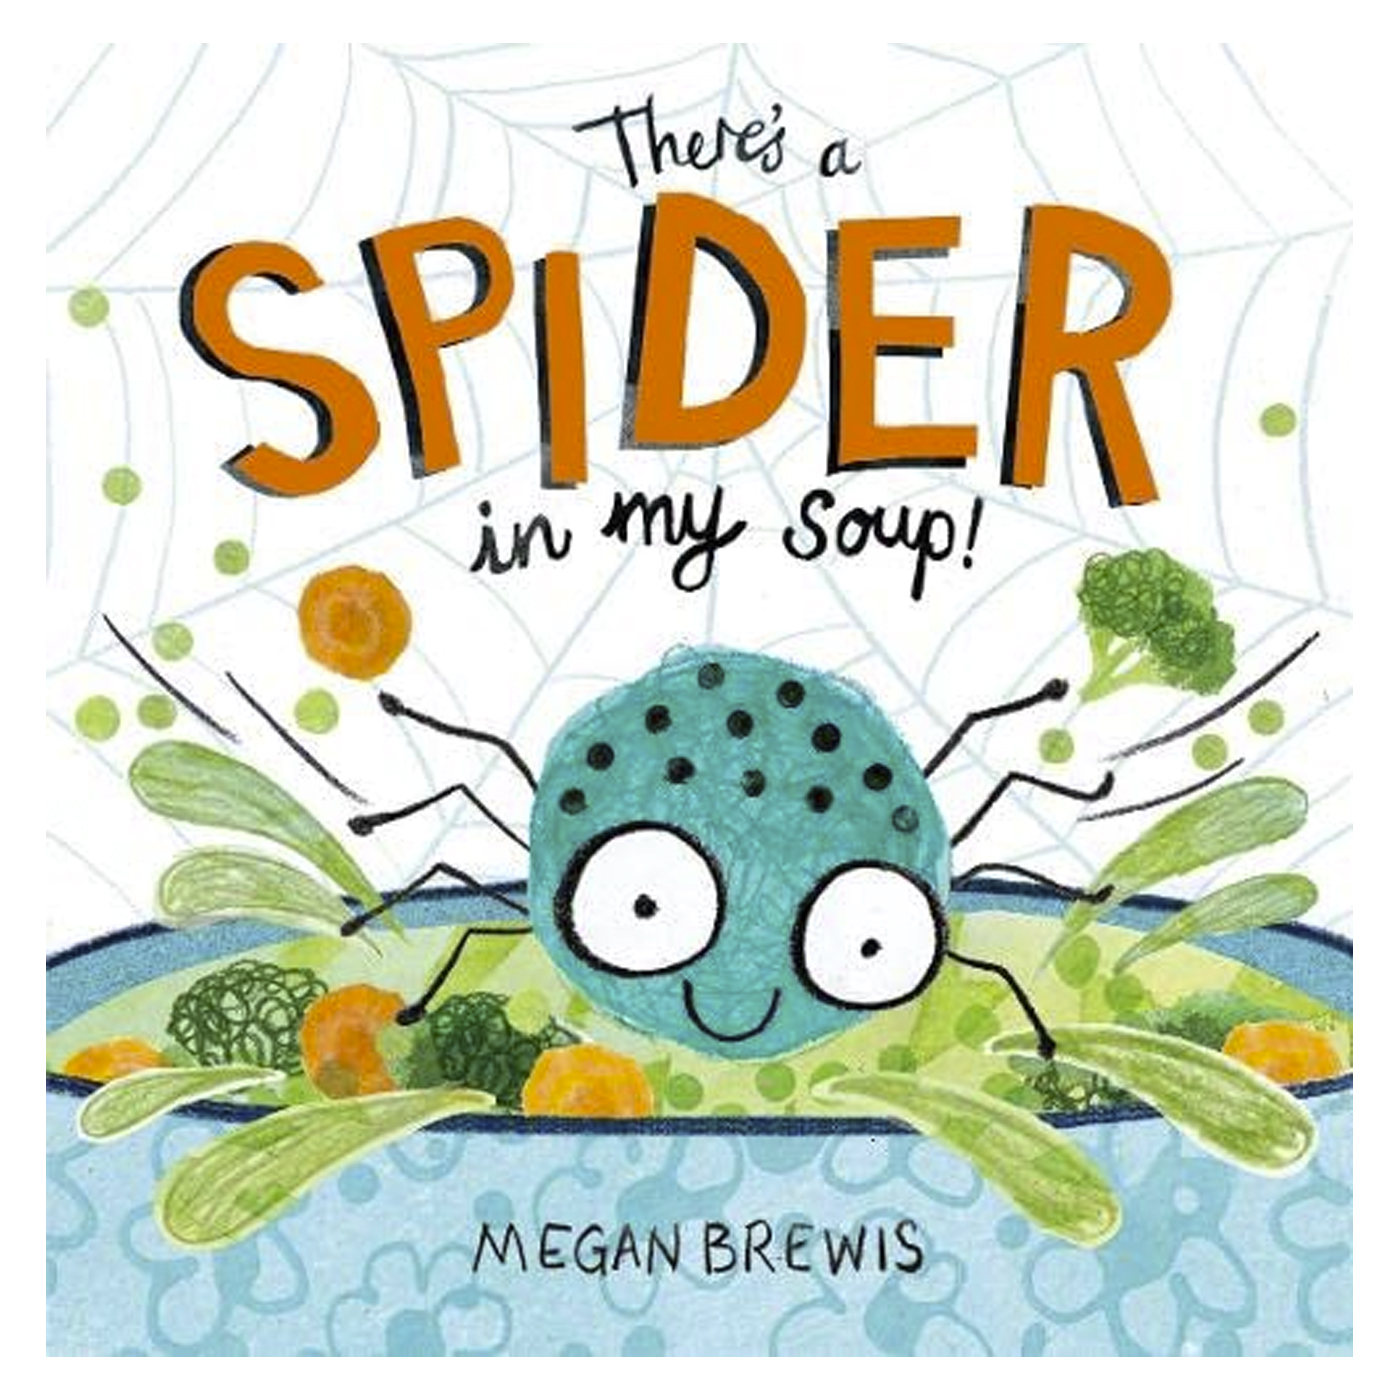 OXFORD CHILDRENS BOOK There's A Spider In My Soup!